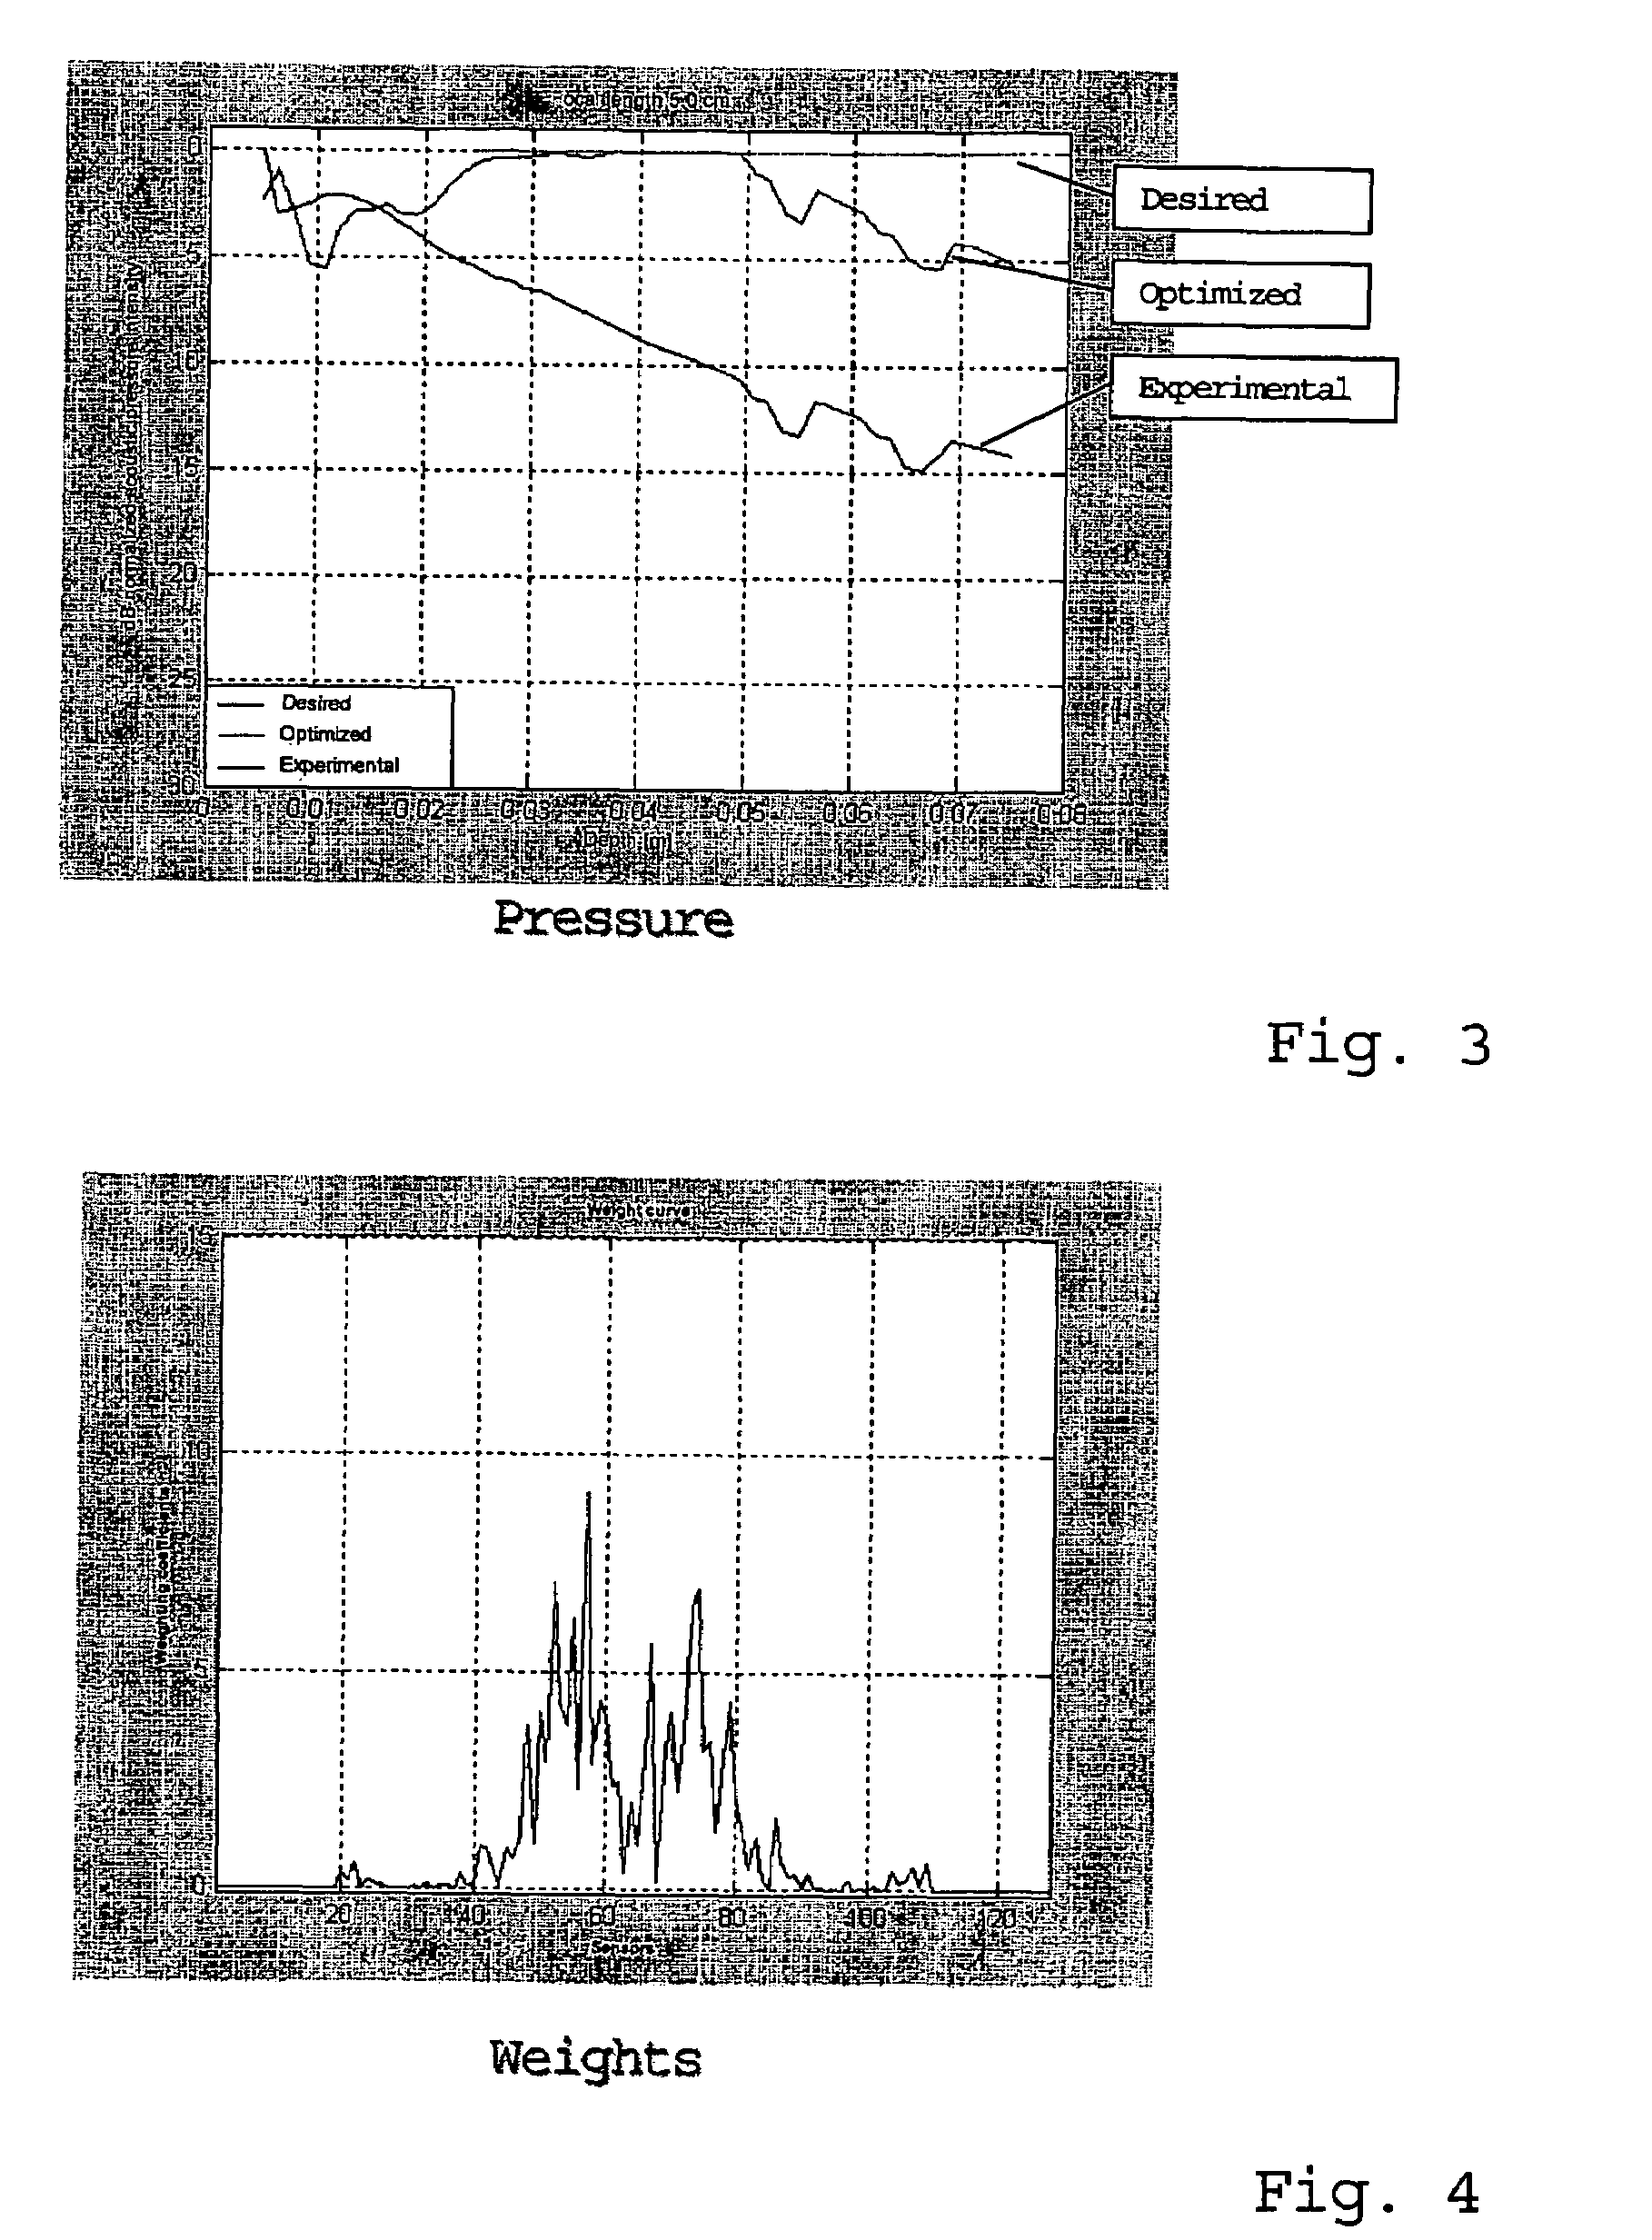 Method for optimization of transmit and receive ultrasound pulses, particularly for ultrasonic imaging